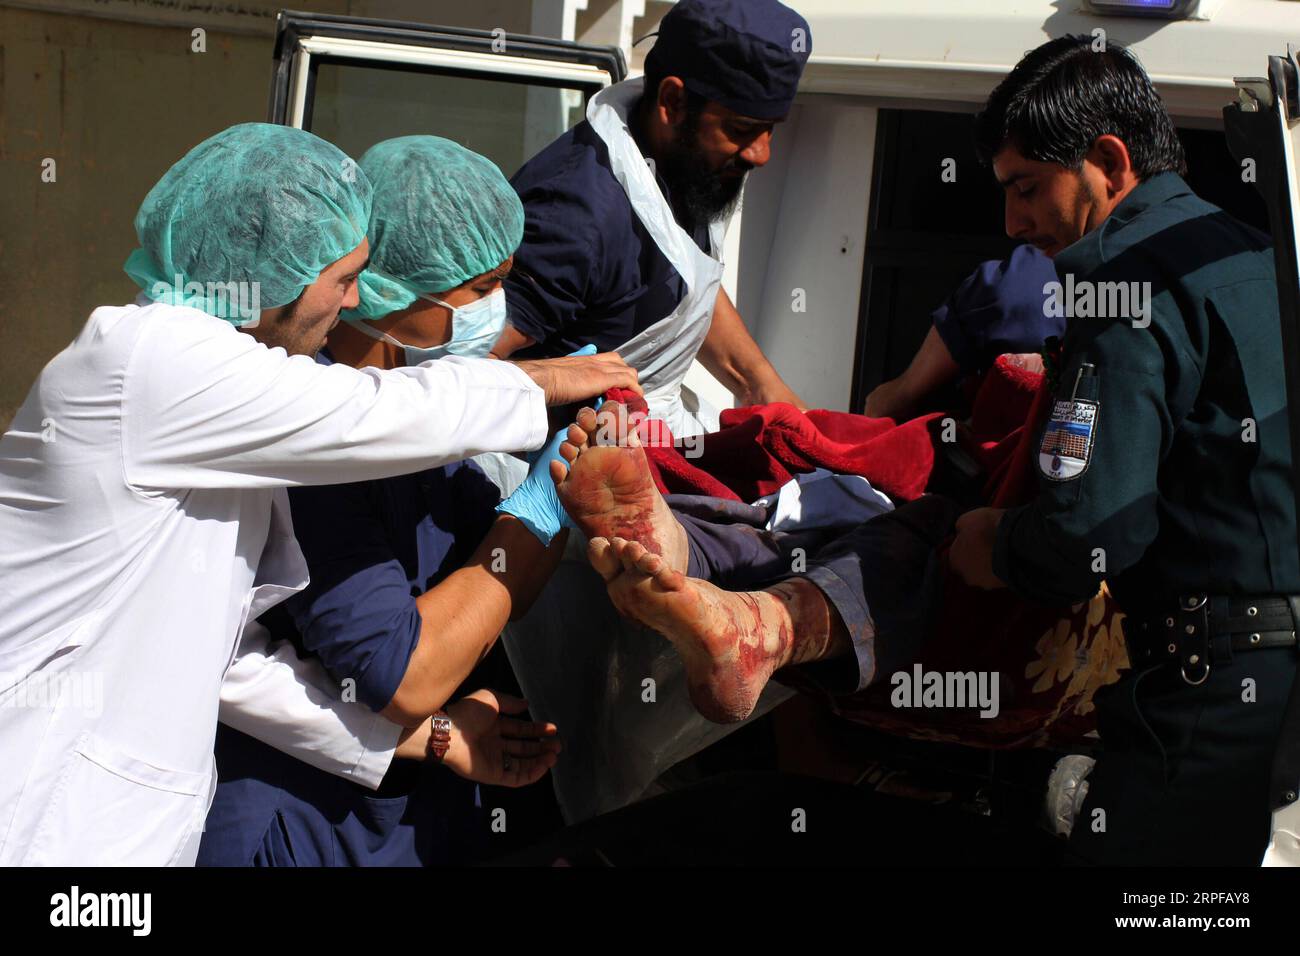 190919 -- KANDAHAR, Sept. 19, 2019 Xinhua -- People take a man injured in a car bomb at Zabul province out of a vehicle for medical treatment at a hospital in Kandahar city, southern Afghanistan, Sept. 19, 2019. The death toll of a car bomb on Thursday that rocked Qalat city, the capital of southern Afghanistan s Zabul province, has risen to 20, with over 93 others wounded, provincial government spokesman Gul Islam Sayal said. Photo by Sanaullah Seiam/Xinhua SPOT NEWS AFGHANISTAN-ZABUL-CAR BOMB-DEATH TOLL PUBLICATIONxNOTxINxCHN Stock Photo